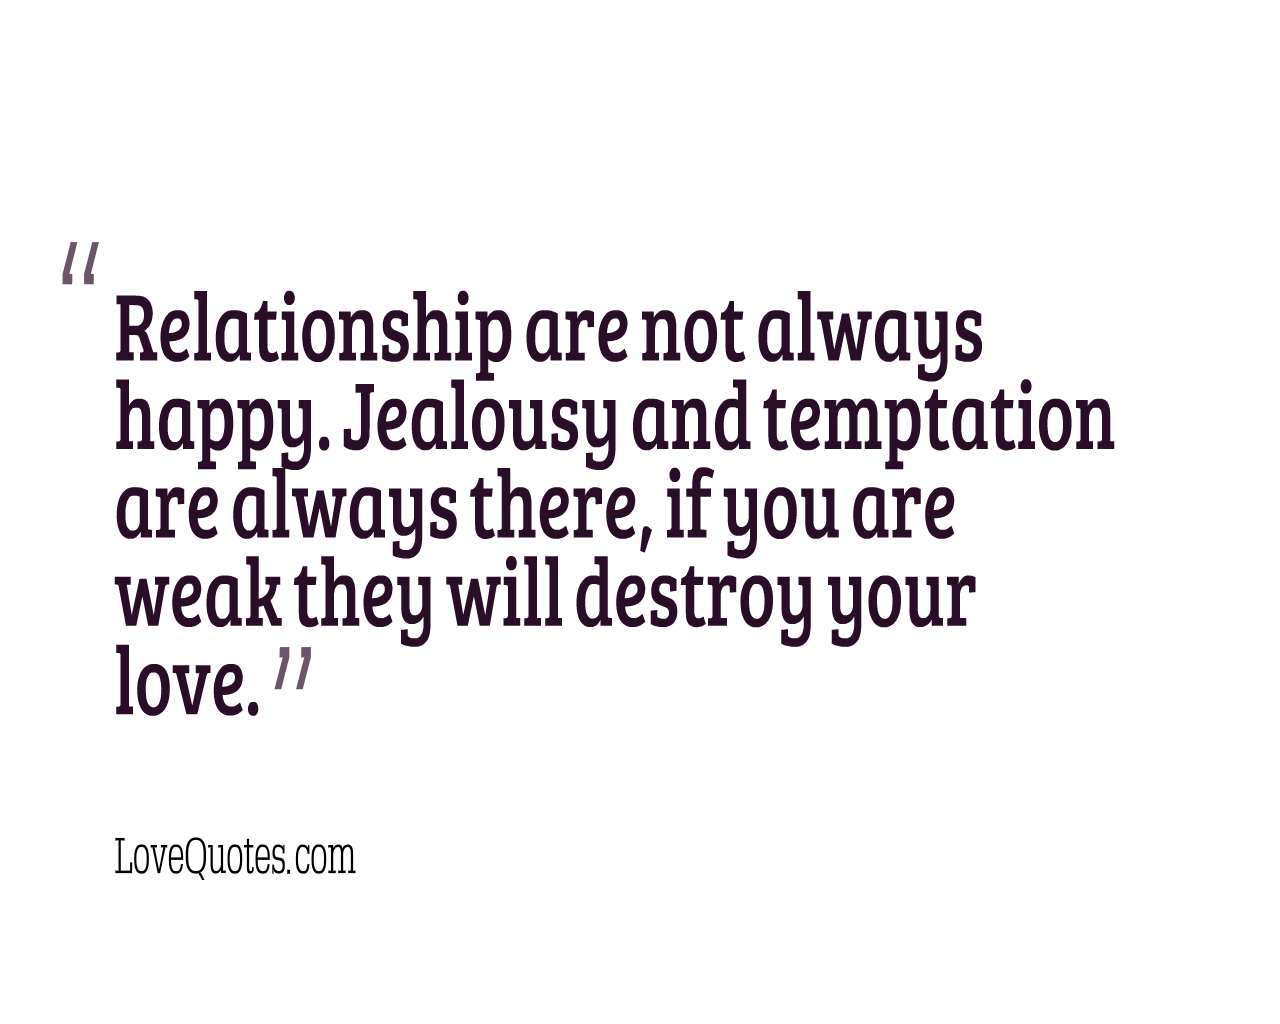 Relationship Is Not Always Happy - Love Quotes